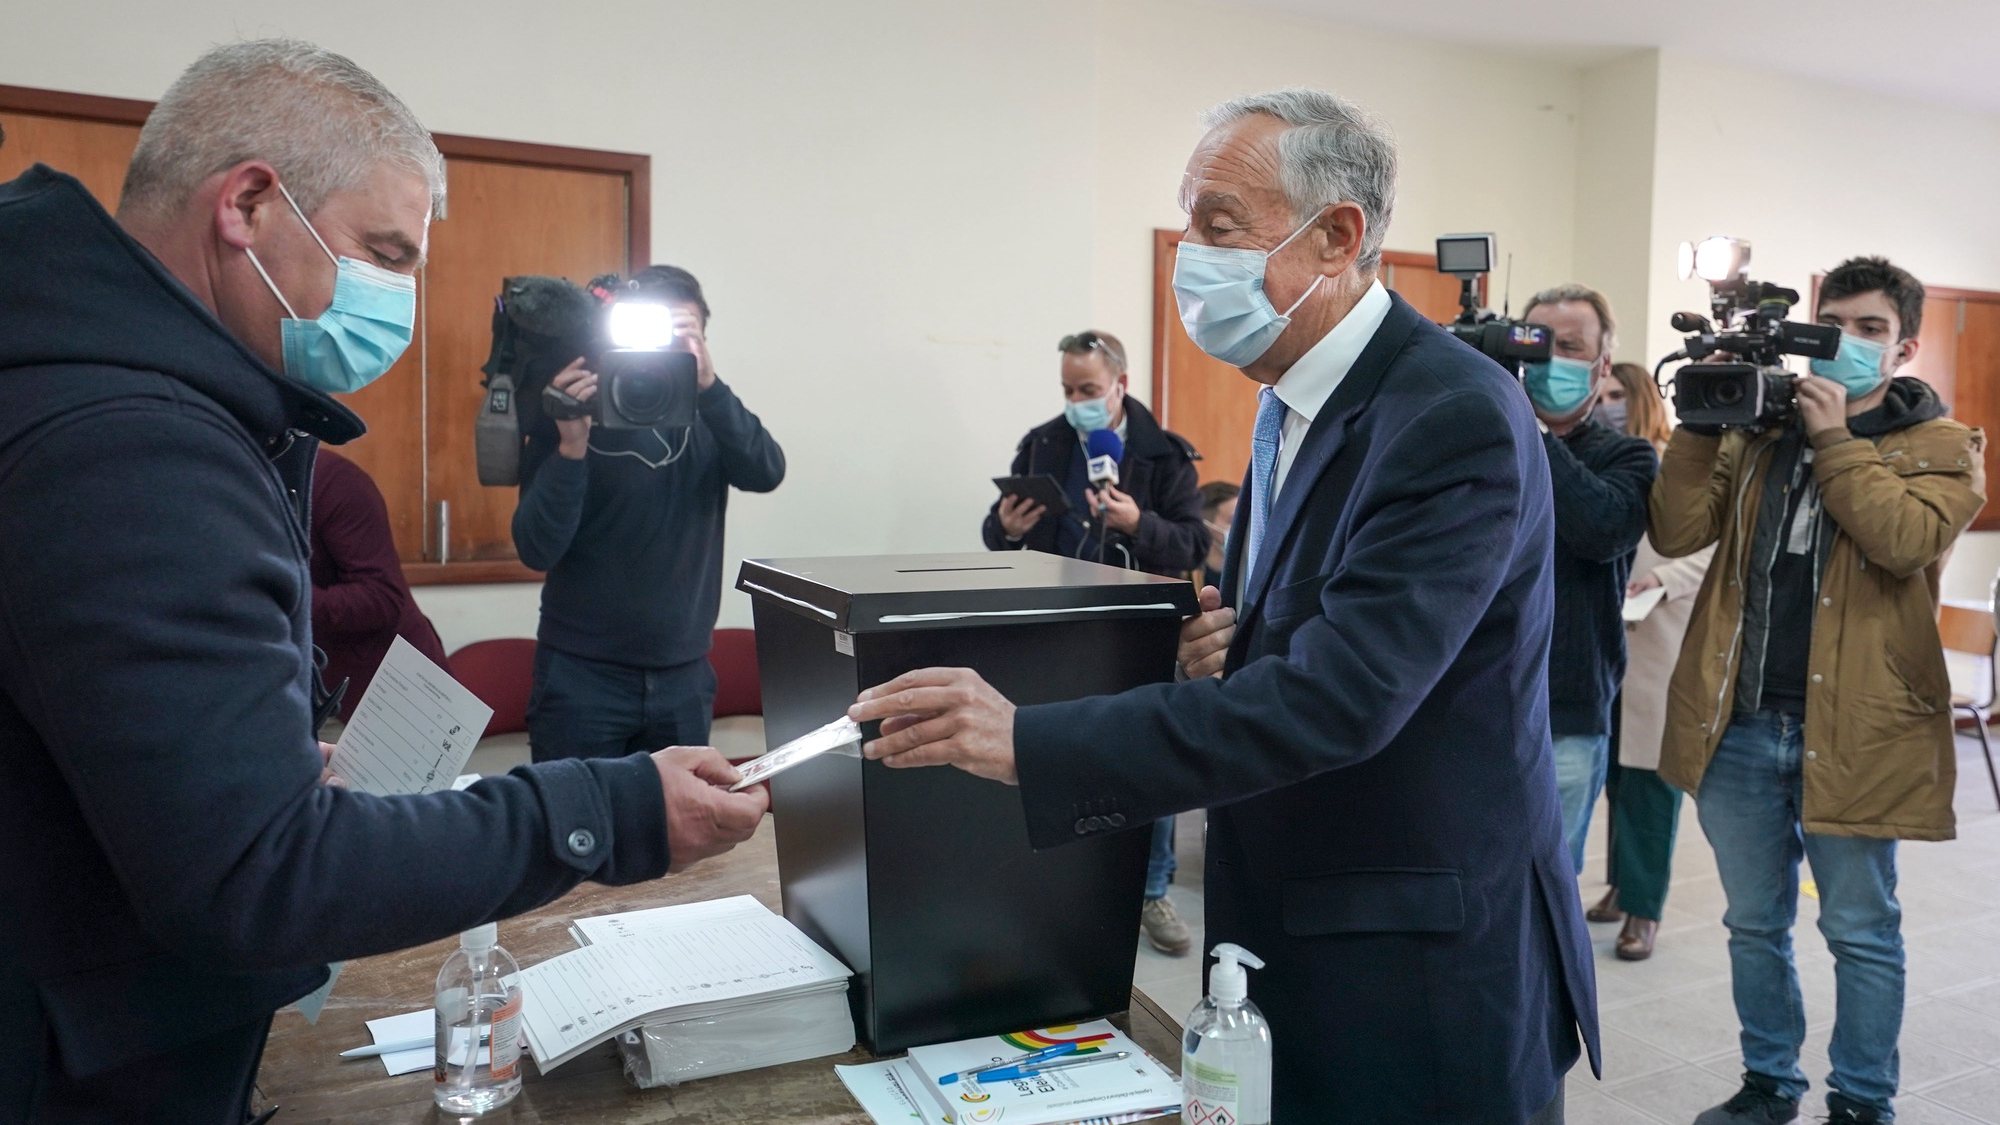 Portuguese President Marcelo Rebelo de Sousa casts his vote in legislative elections in Celorico de Basto, Portugal, 30 January 2022. More than 10 million voters living in Portugal and abroad are on the electoral roll to choose the 230 deputies for the Portuguese Parliament after the Parliament rejected the minority socialist government&#039;s 2022 state budget in November . Celorico de Basto, 30 January 2022. HUGO DELGADO/LUSA